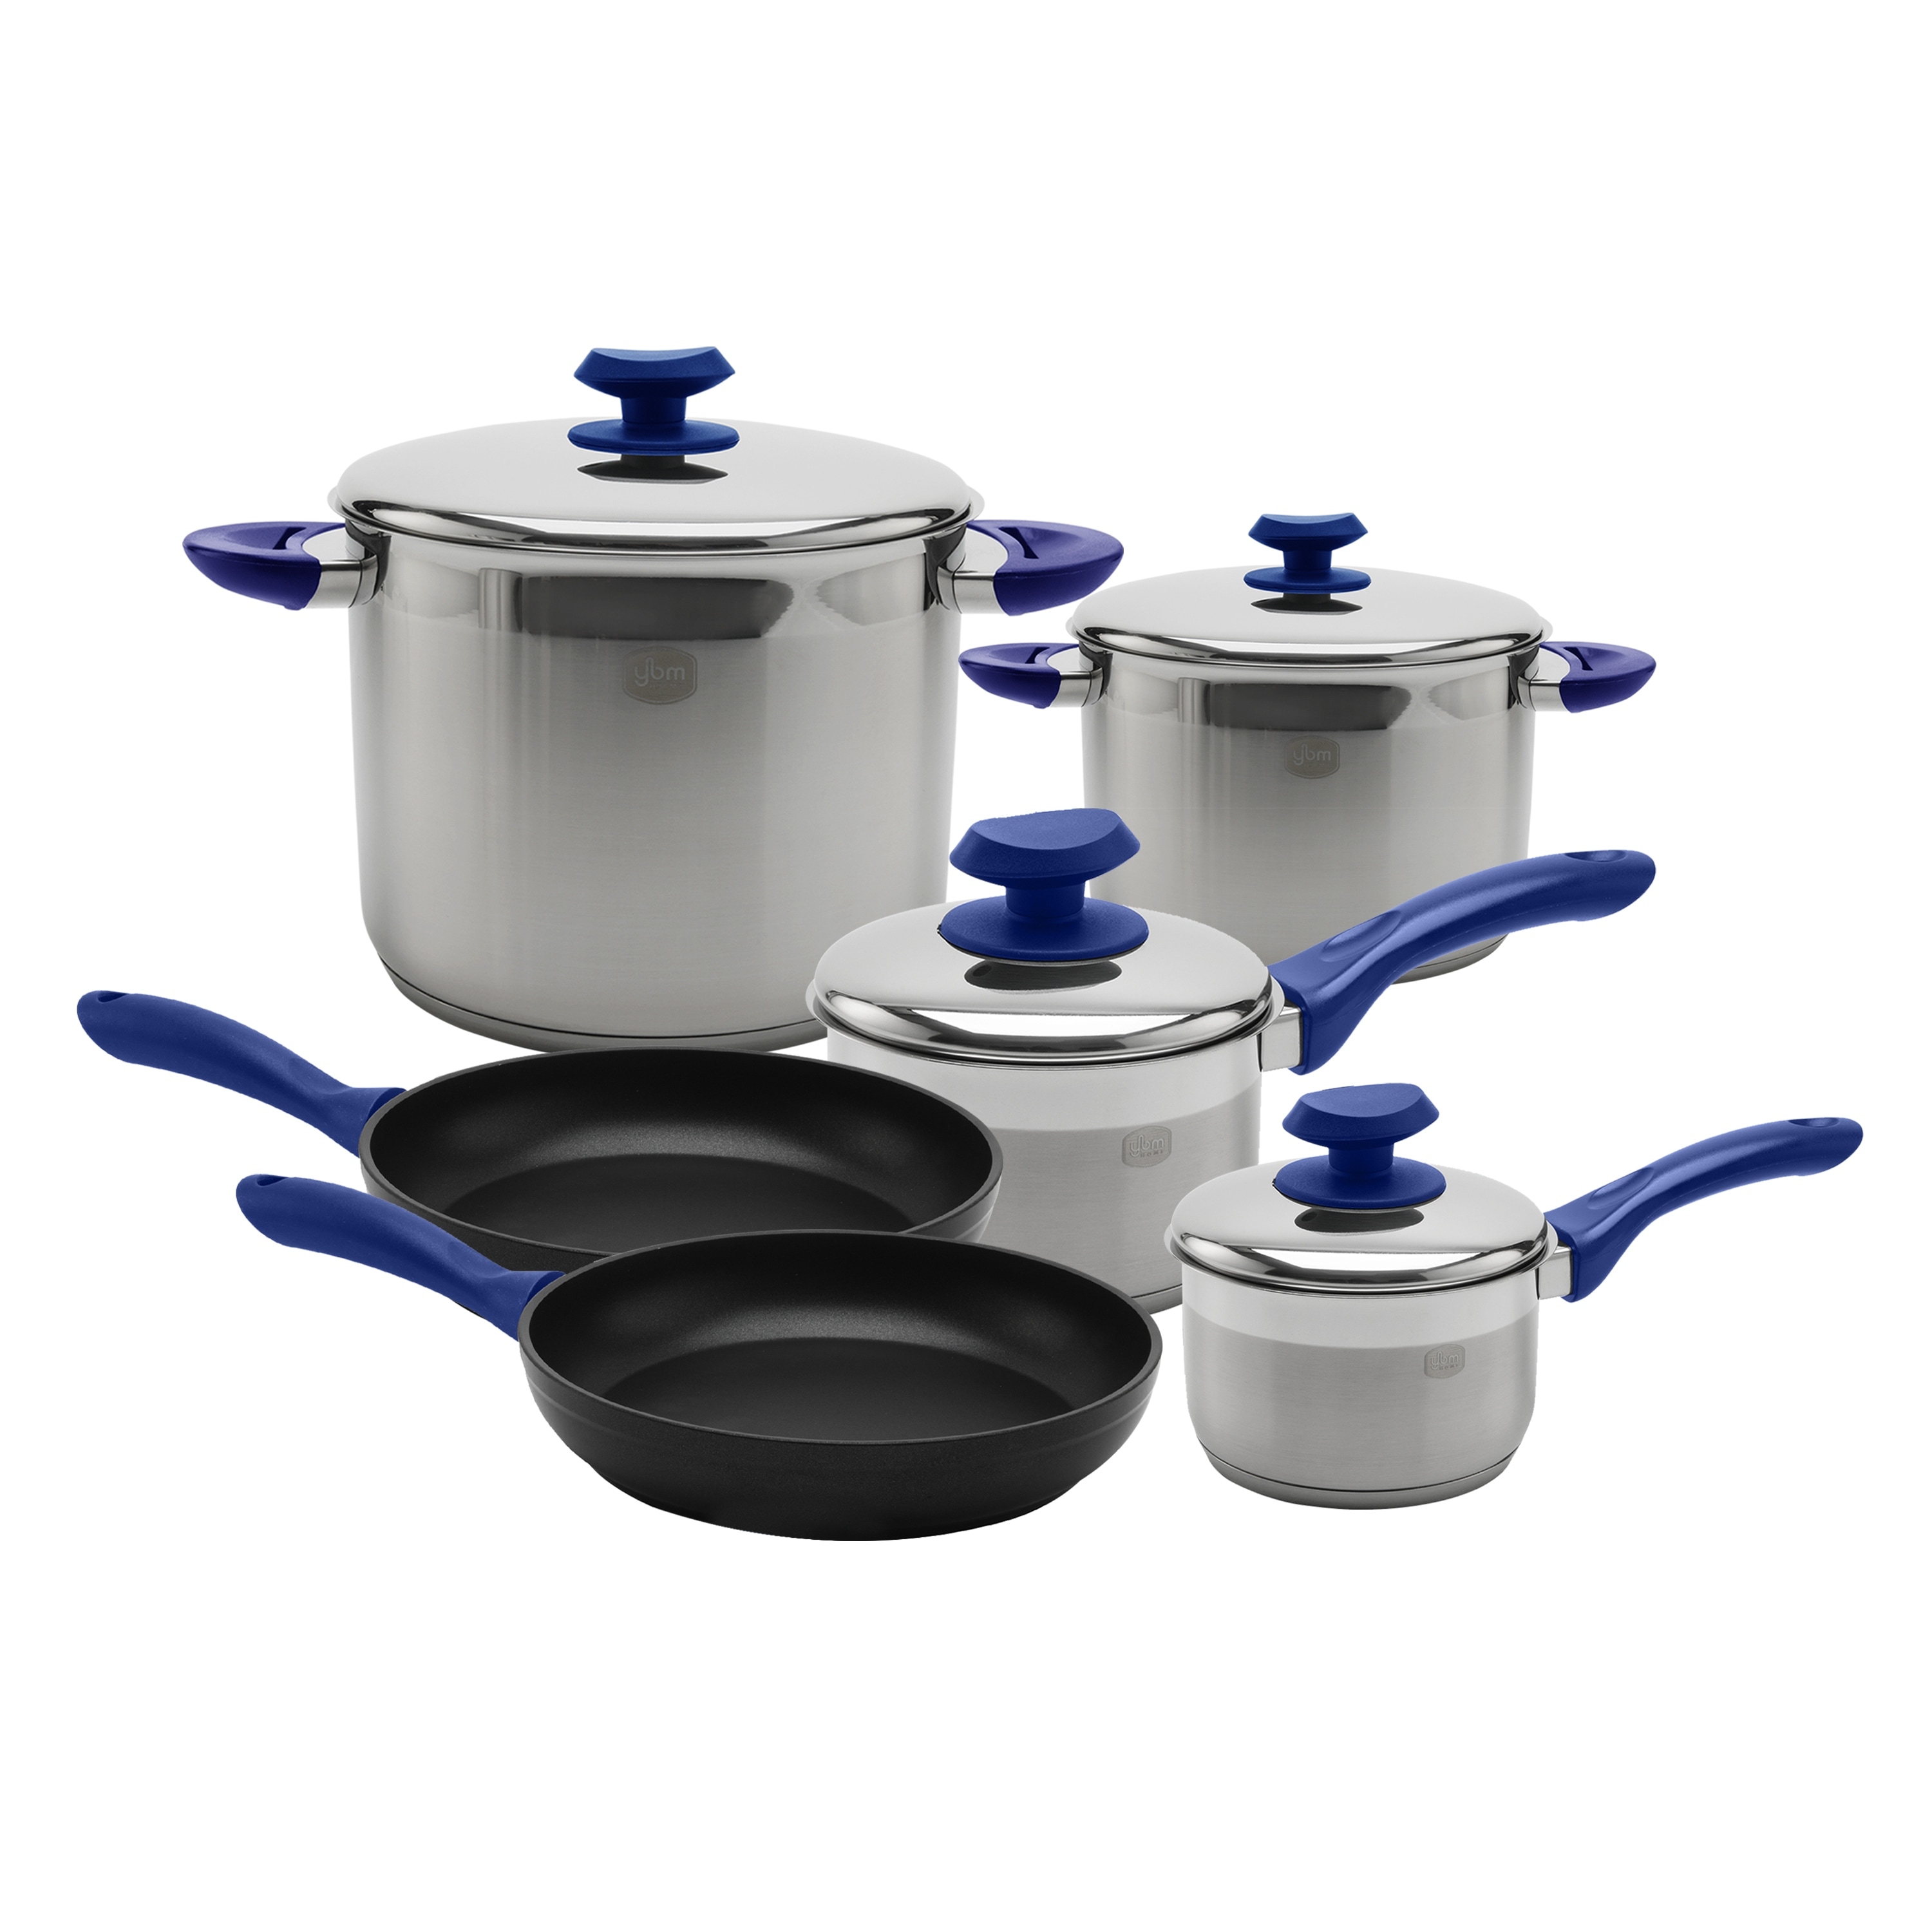 https://ak1.ostkcdn.com/images/products/is/images/direct/314a7afbfde8e0c7bdd447f10cf3912bc9bce8f5/YBM-Home-18-10-Tri-Ply-Stainless-Steel-Cookware-Set-Induction-Compatible.jpg